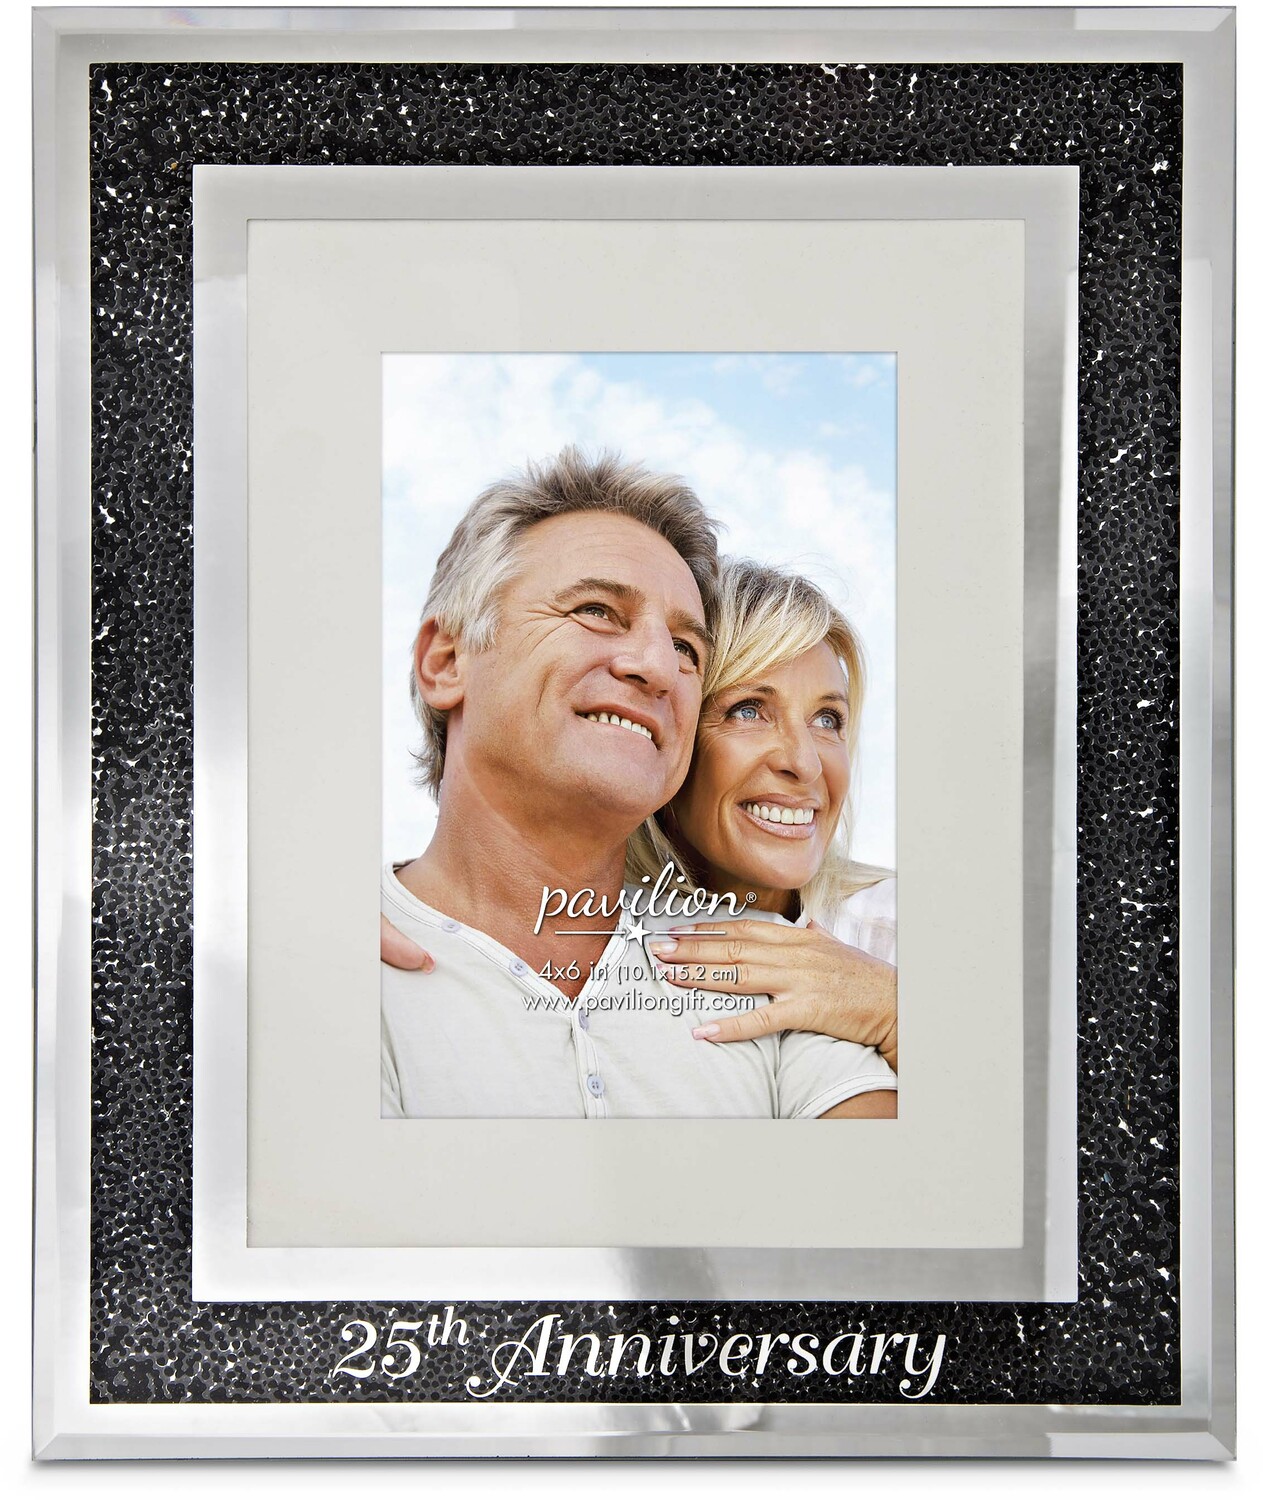 25th Anniversary by Glorious Occasions - 25th Anniversary - 9"x11" Frame (Holds 4"x6" Photo)